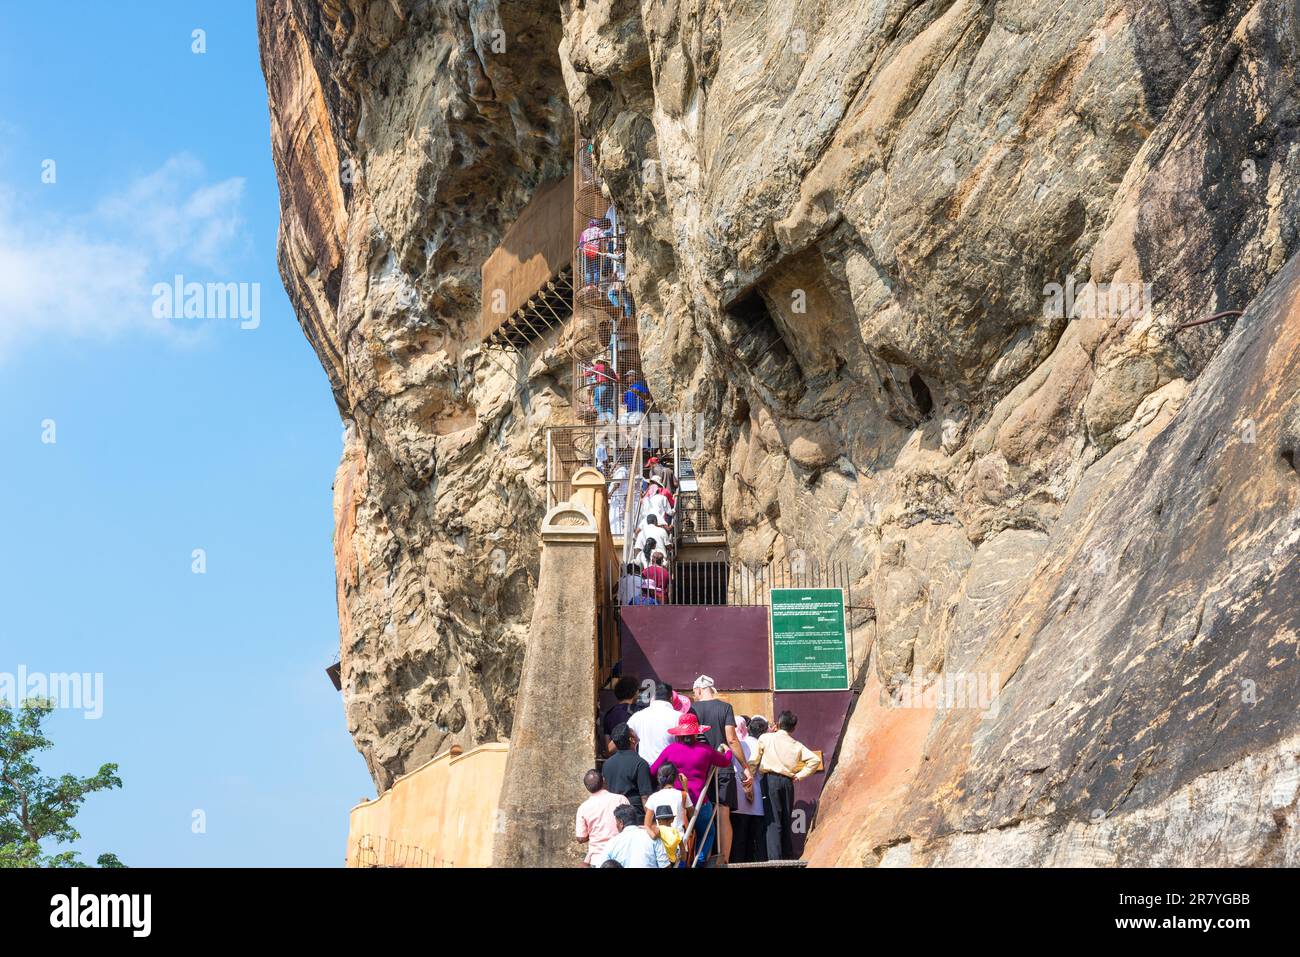 People climb up stairs and spiral stairs that leads to the cave with the famous frescoes Stock Photo